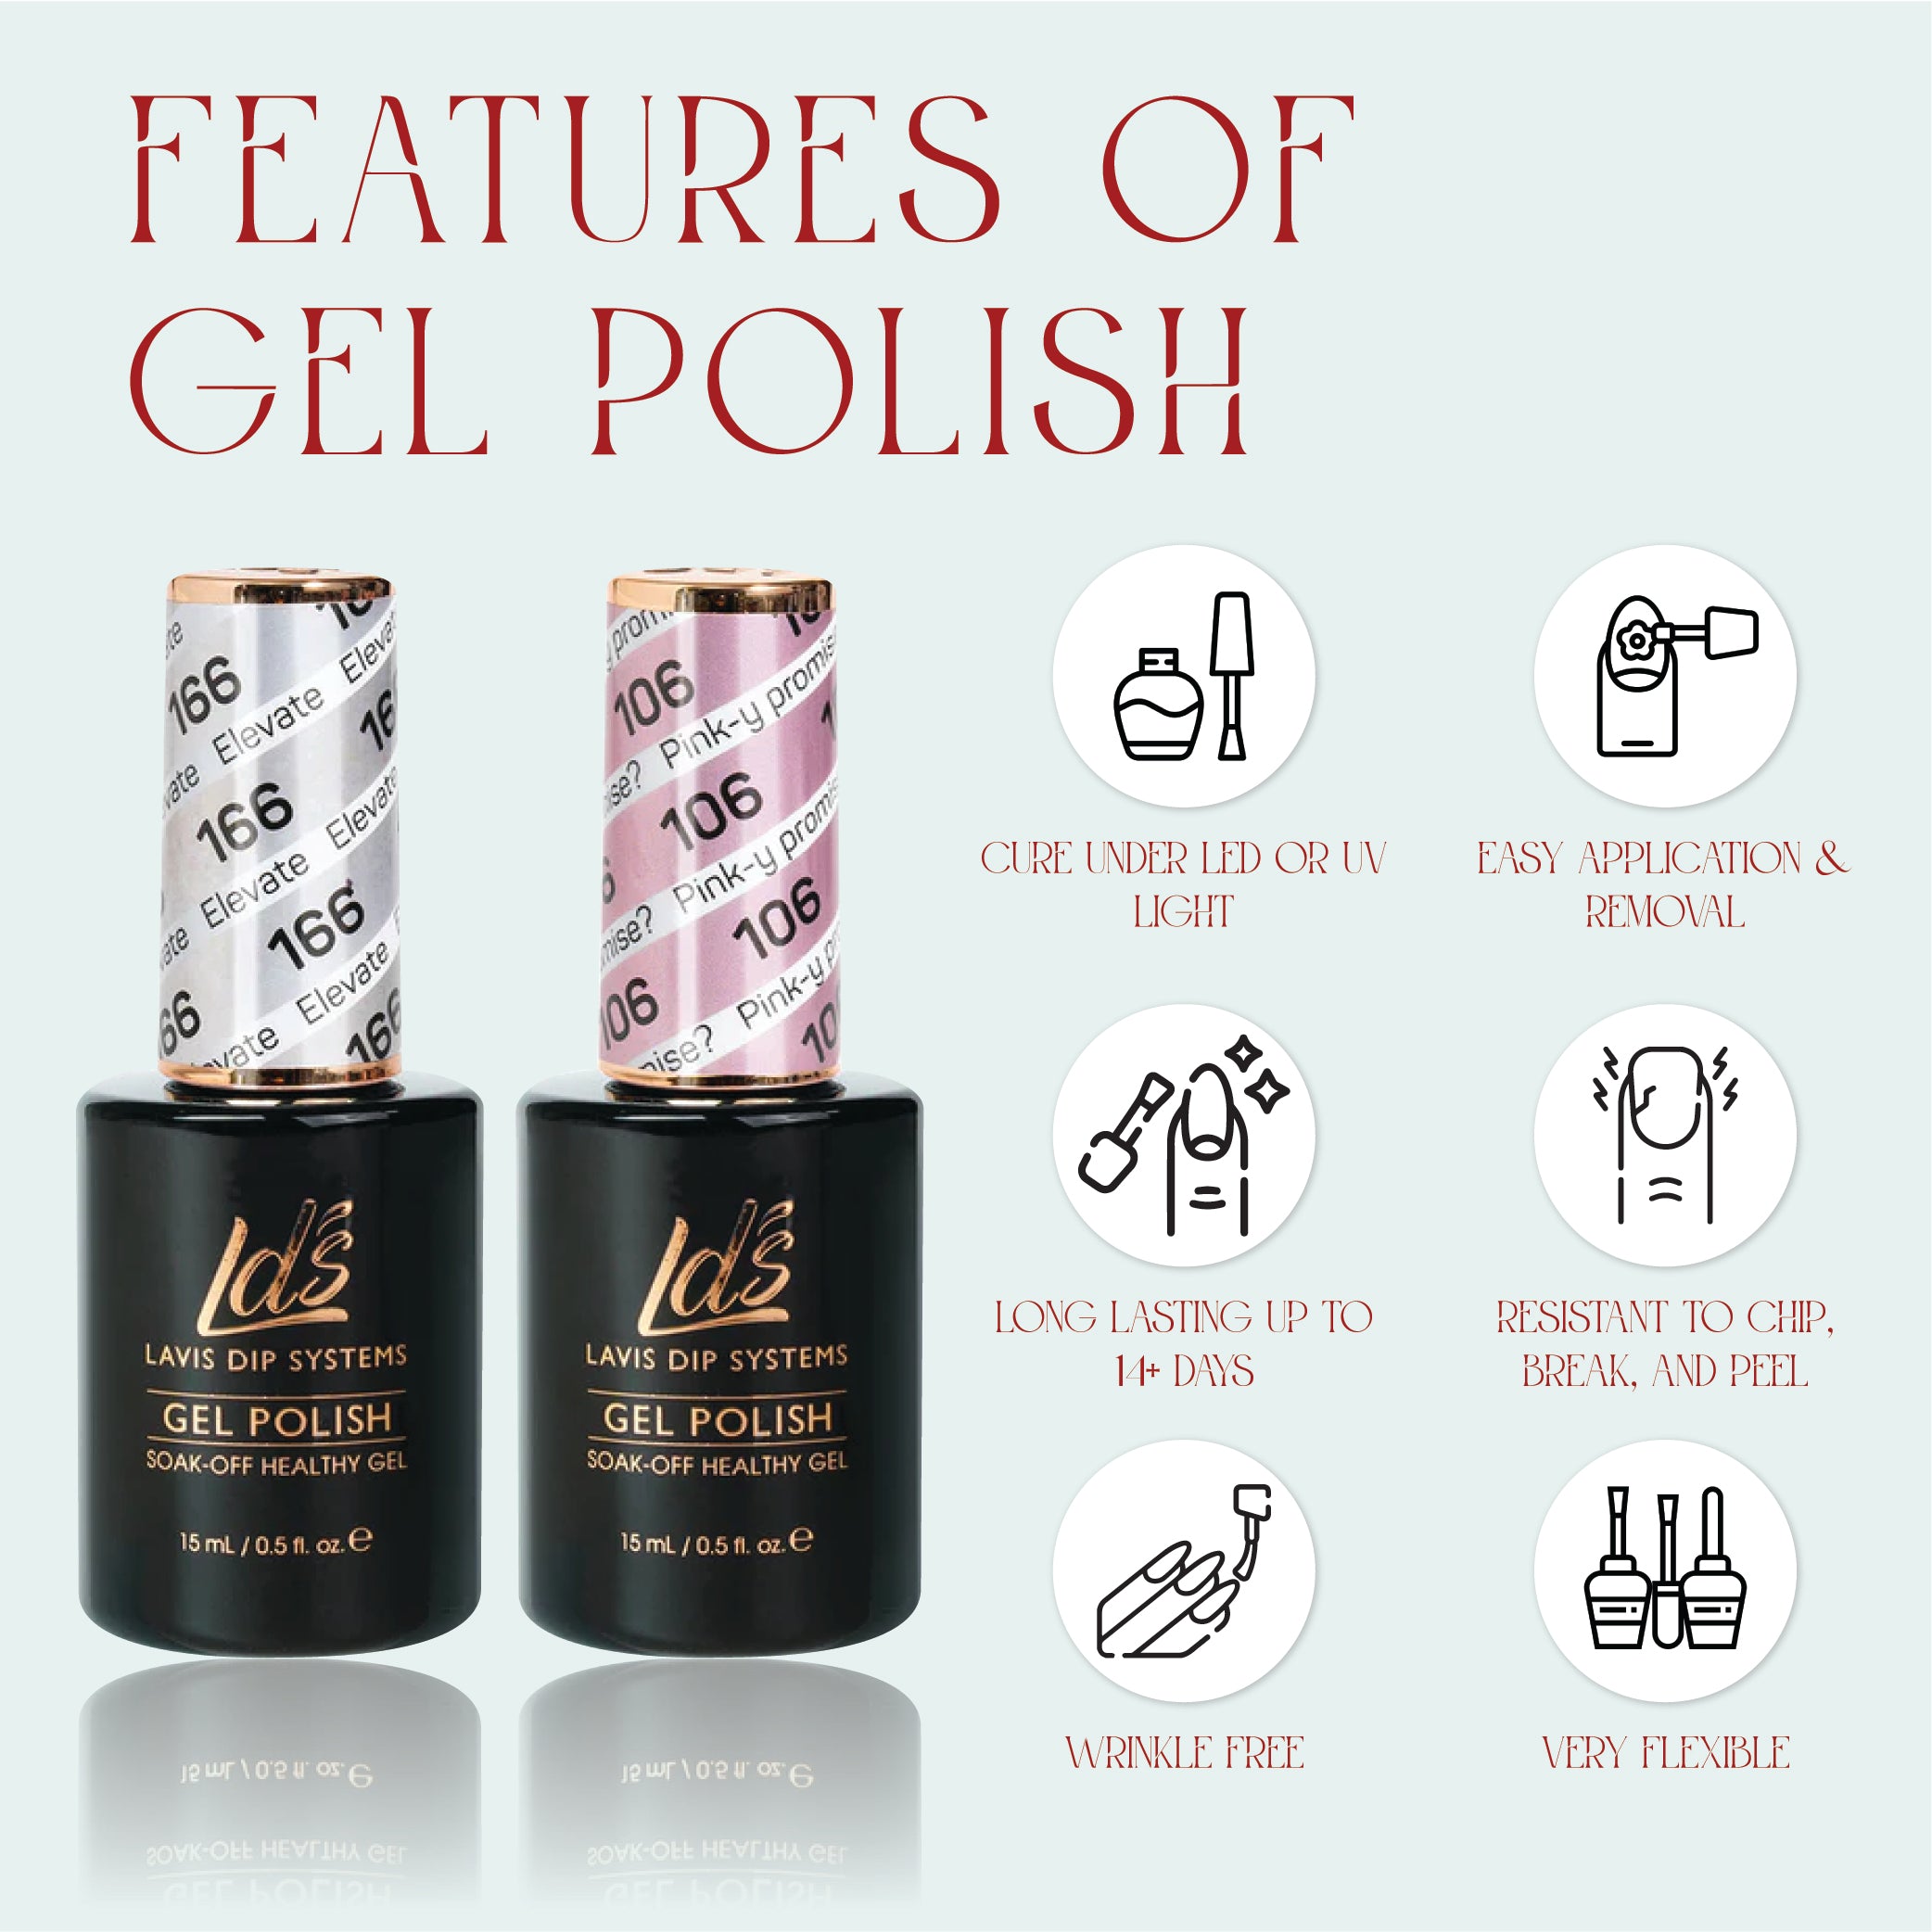 LDS 181 Pink Rose - LDS Healthy Gel Polish & Matching Nail Lacquer Duo Set - 0.5oz